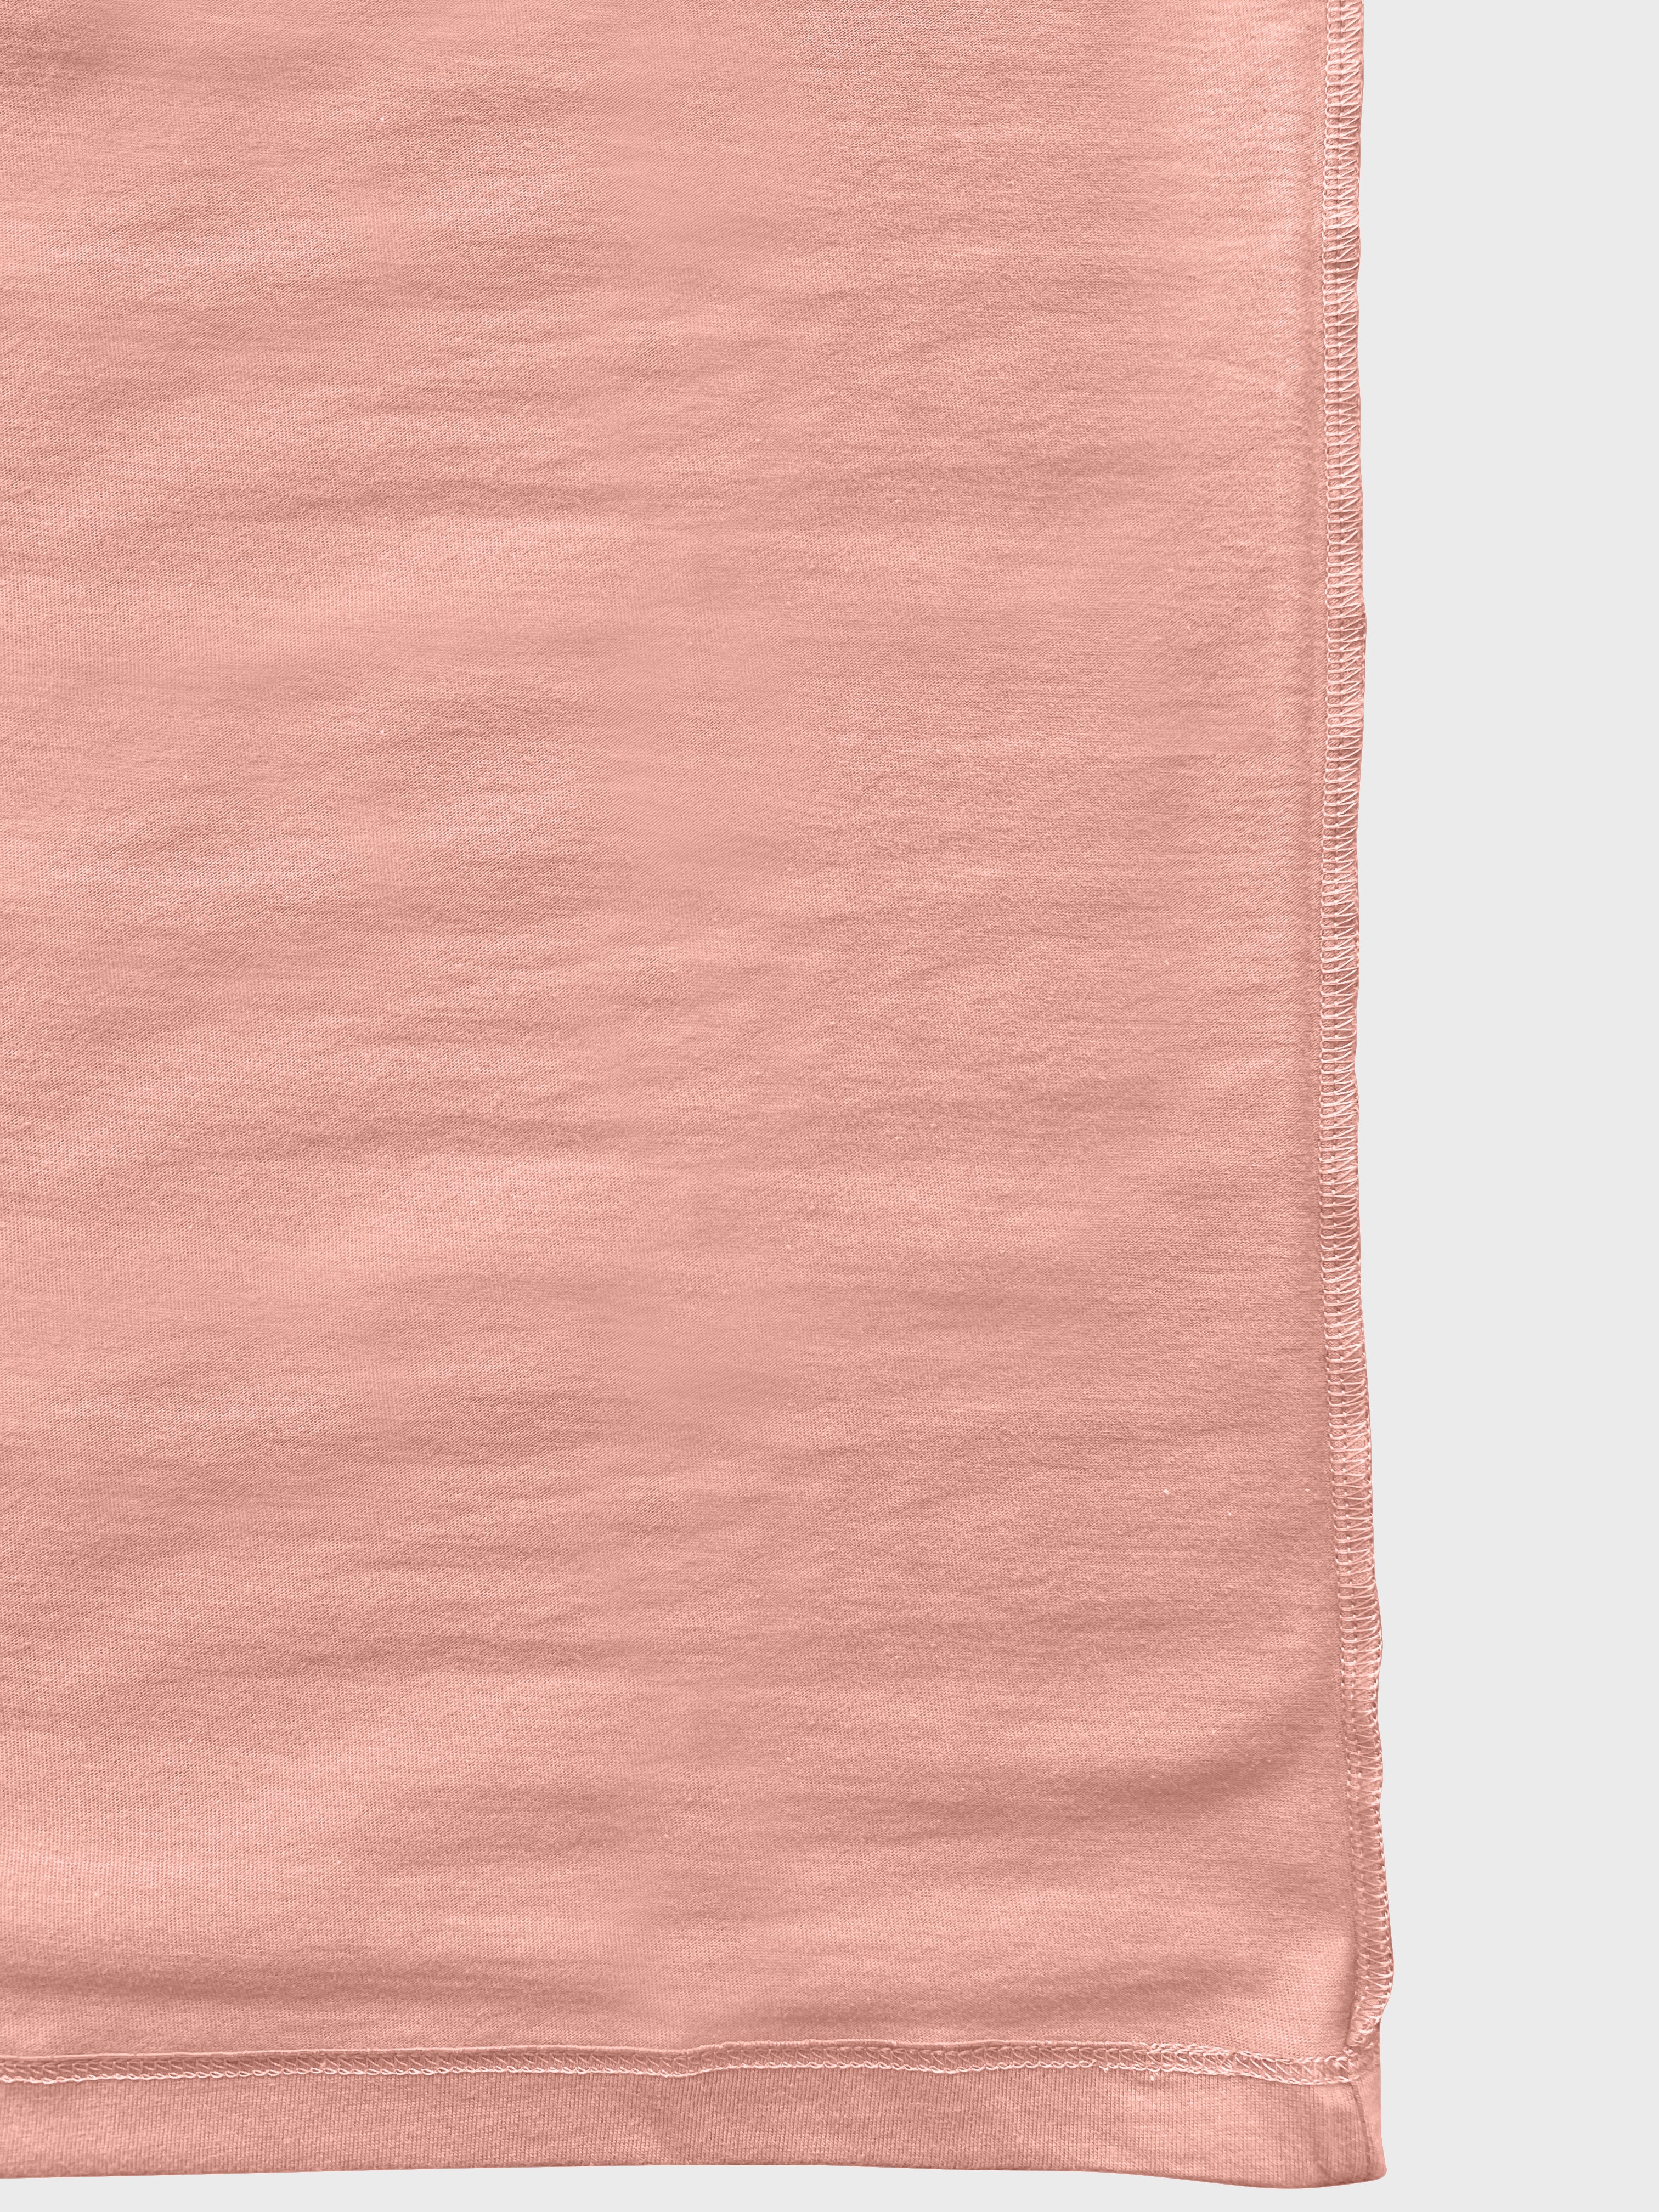 Crew Neck Desert Pink blank T-shirt in side view